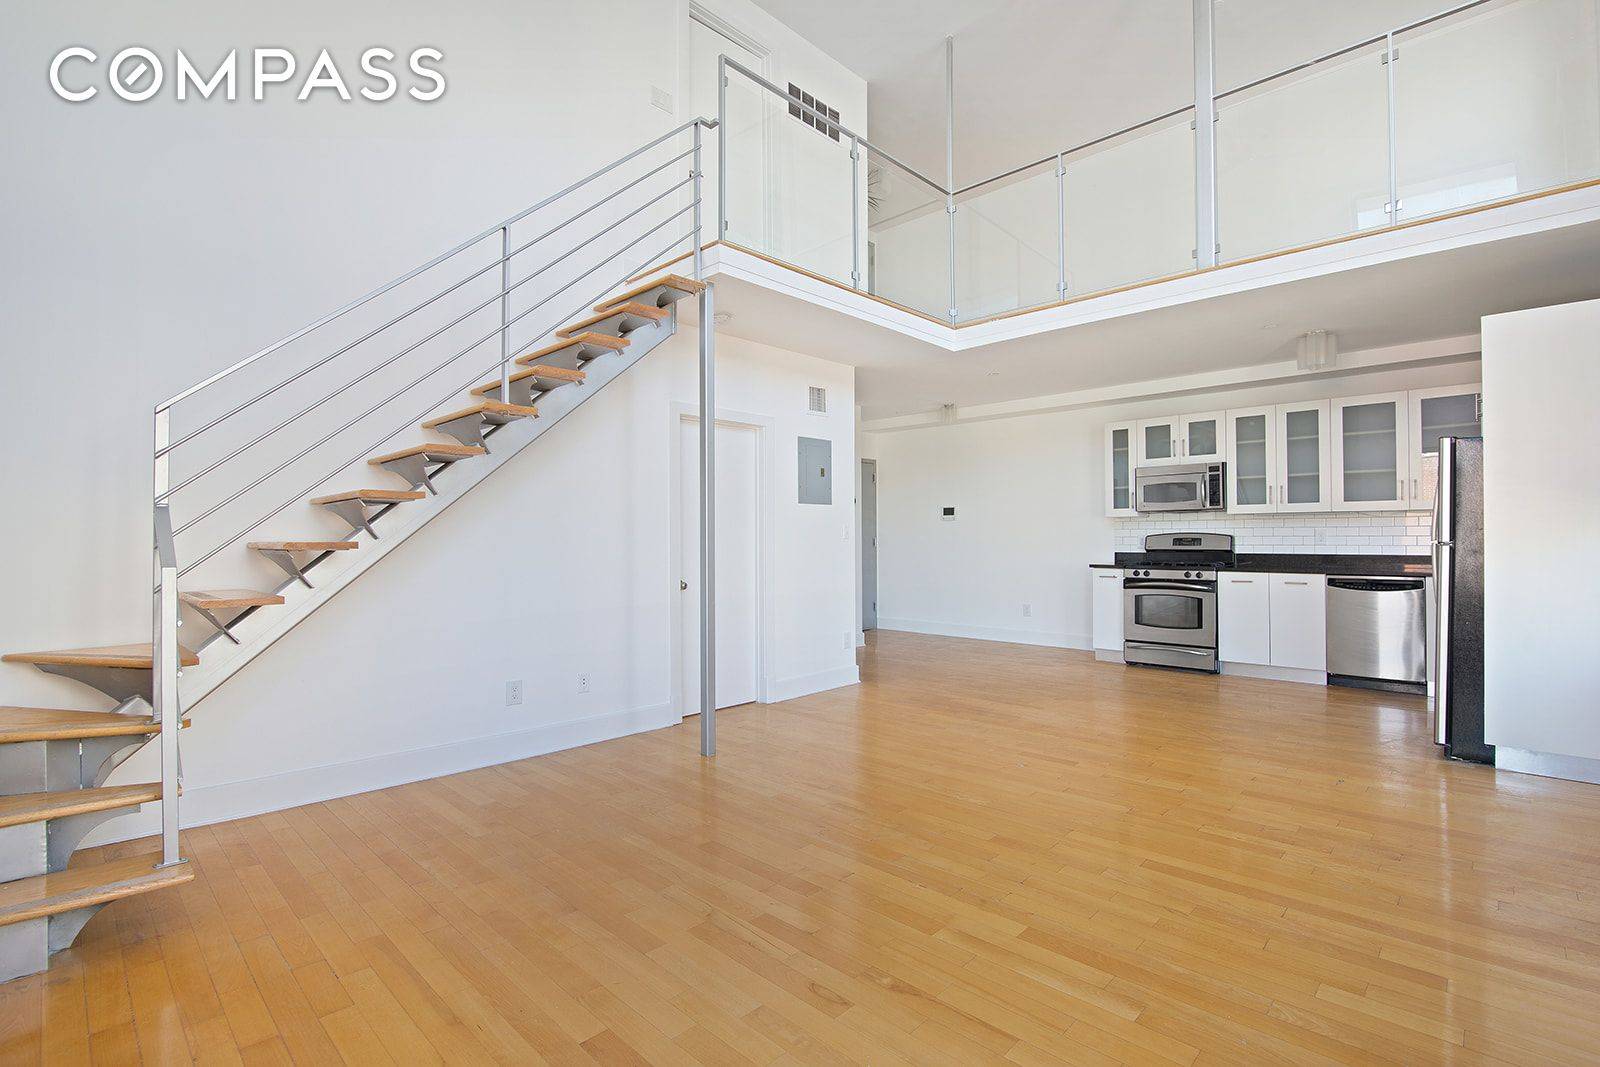 RARE Find ! This gorgeous corner duplex loft is configured as a 2 Bed 2 Bath home with floor to ceiling windows and 17 ft high ceilings.